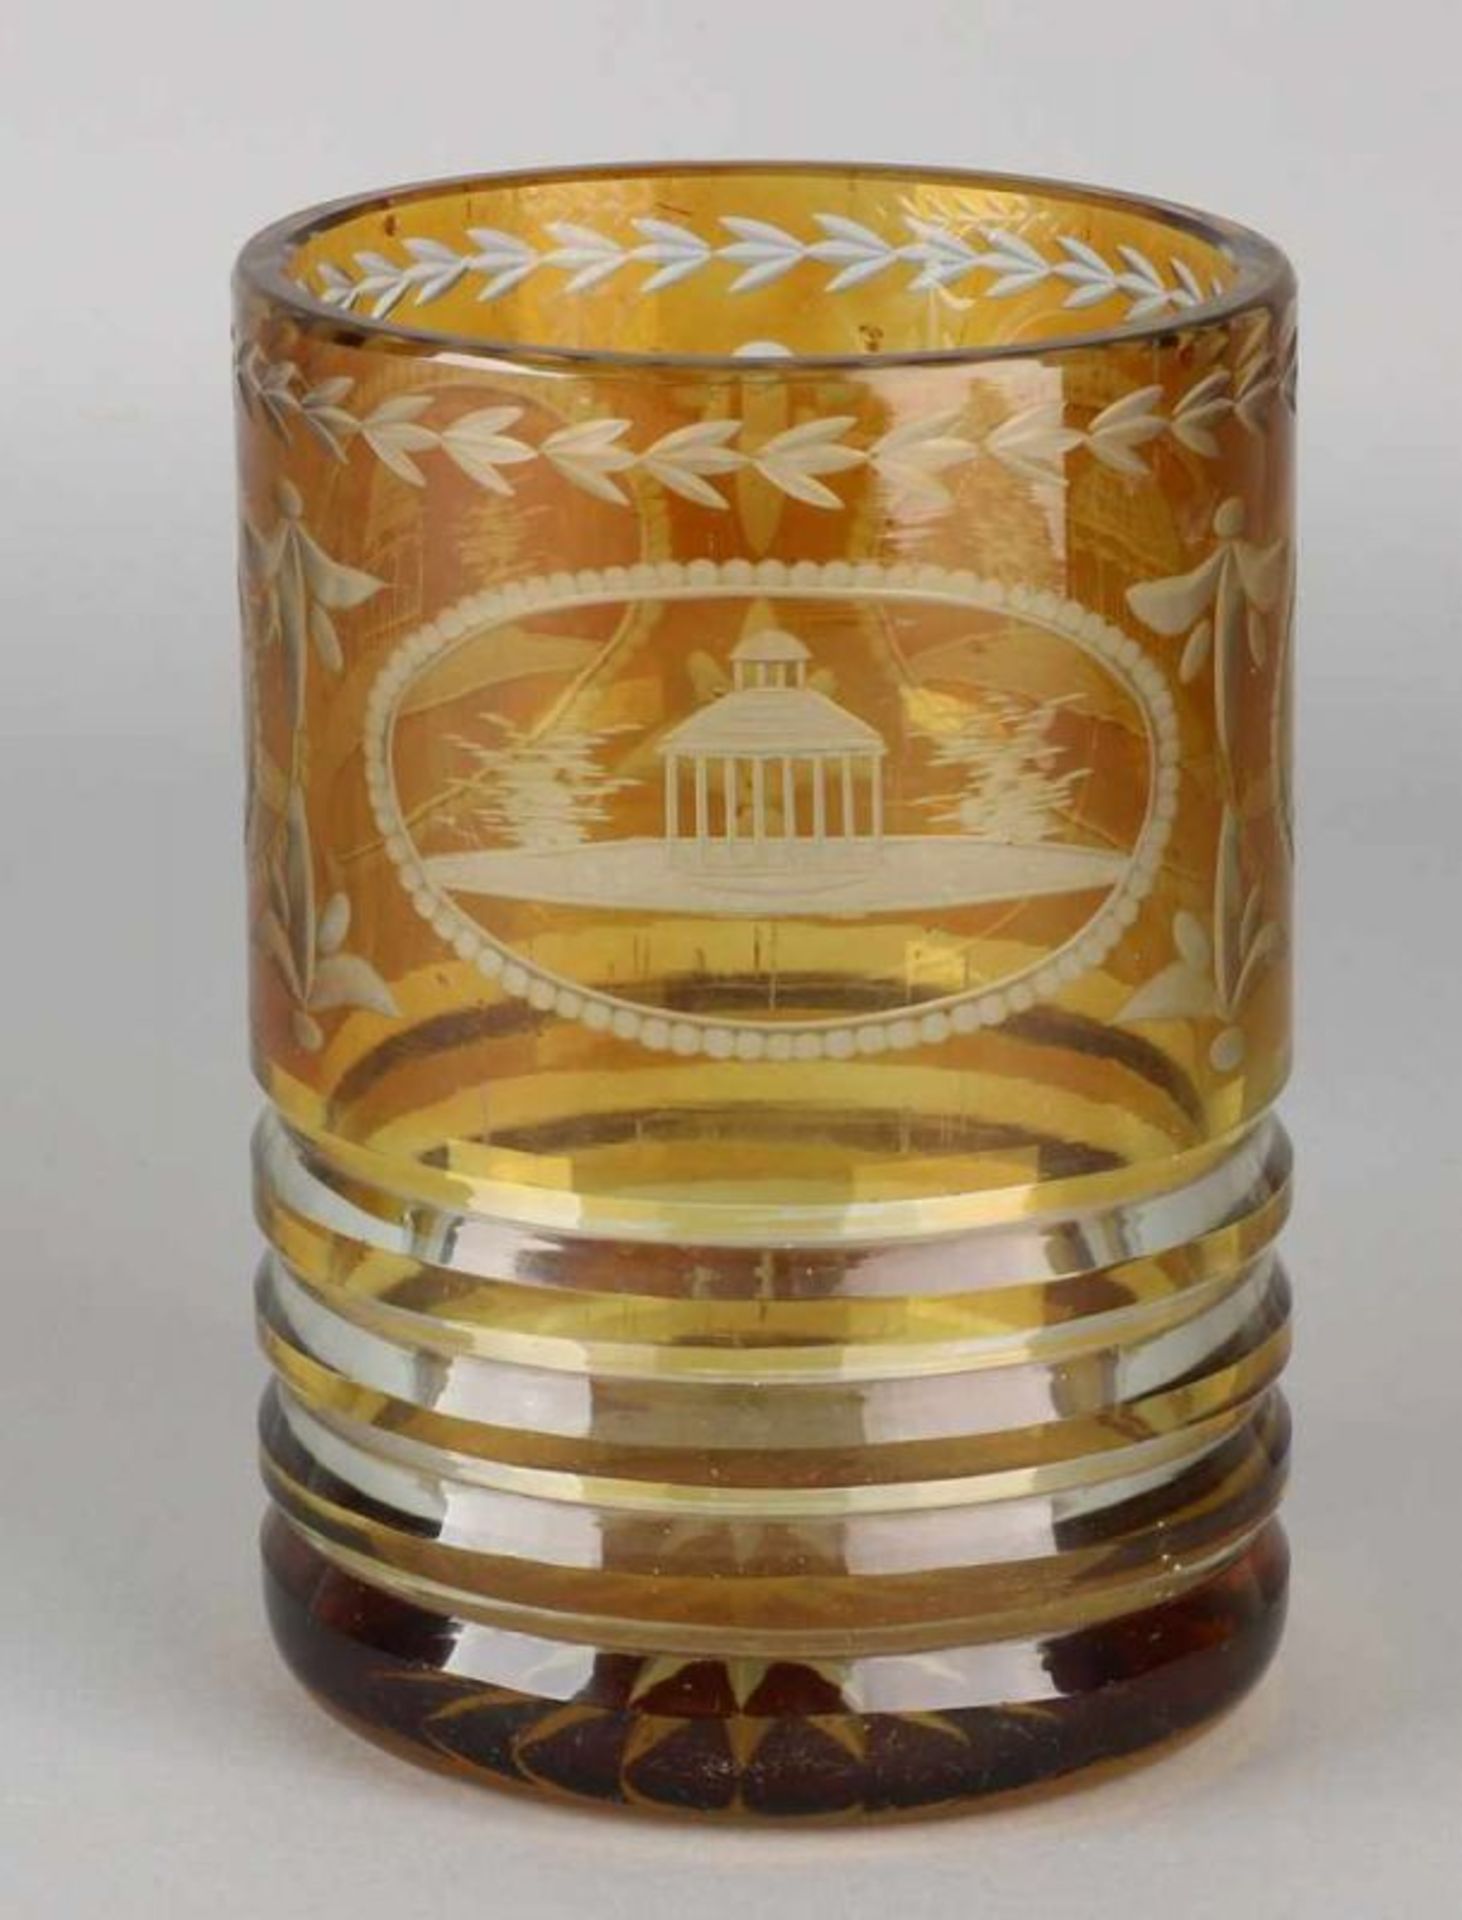 Antique crystal glass jar with Masonic citadels. Size: 16 x 11 cm dia. In good condition.